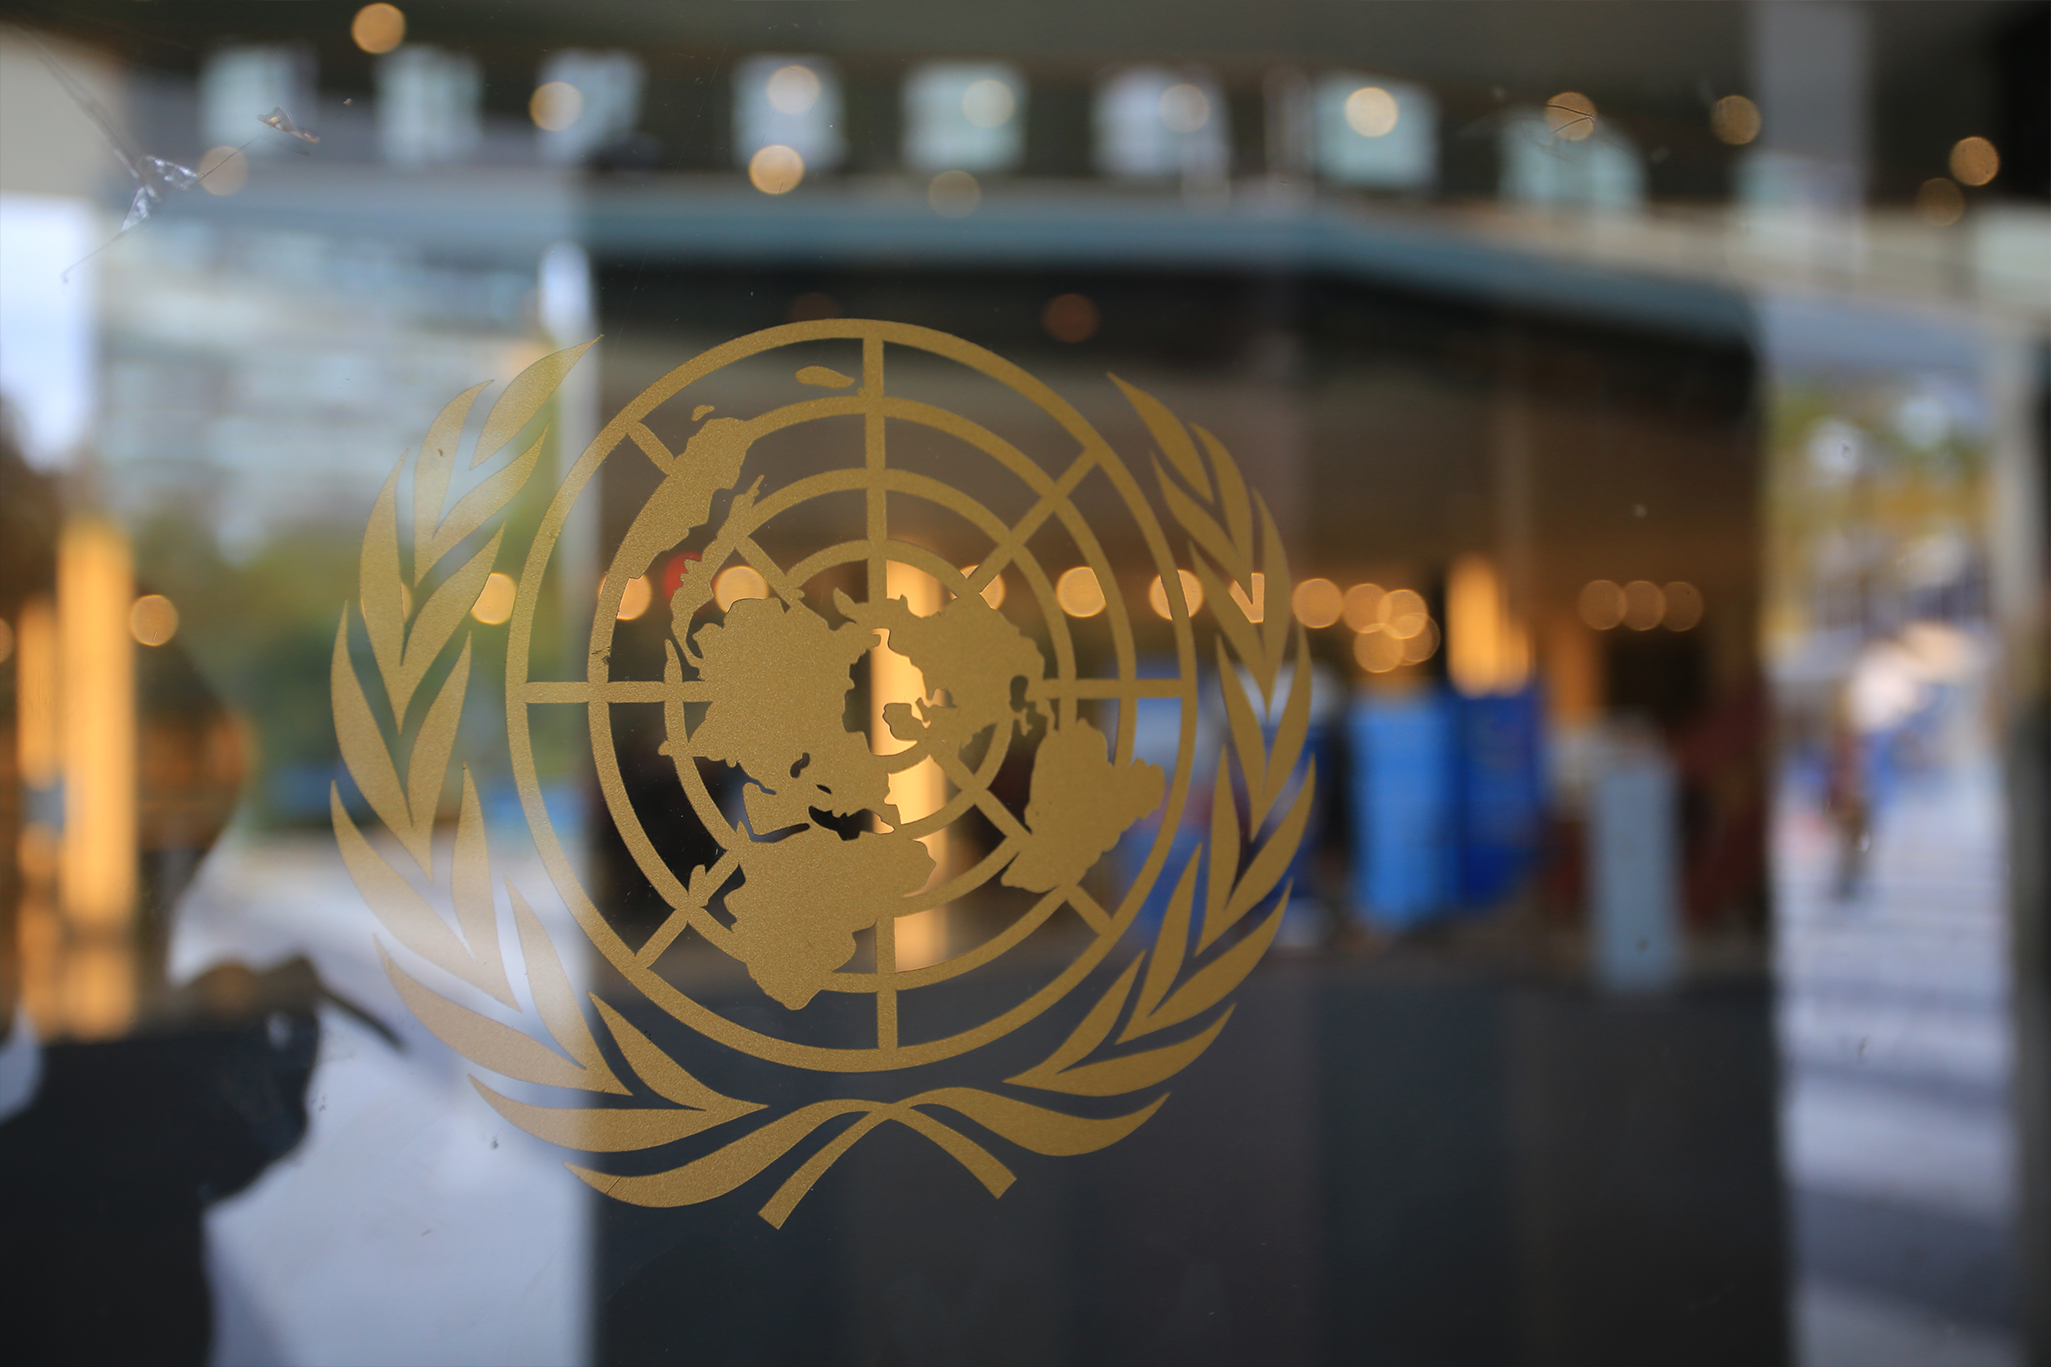 The United Nations logo in a glass wall